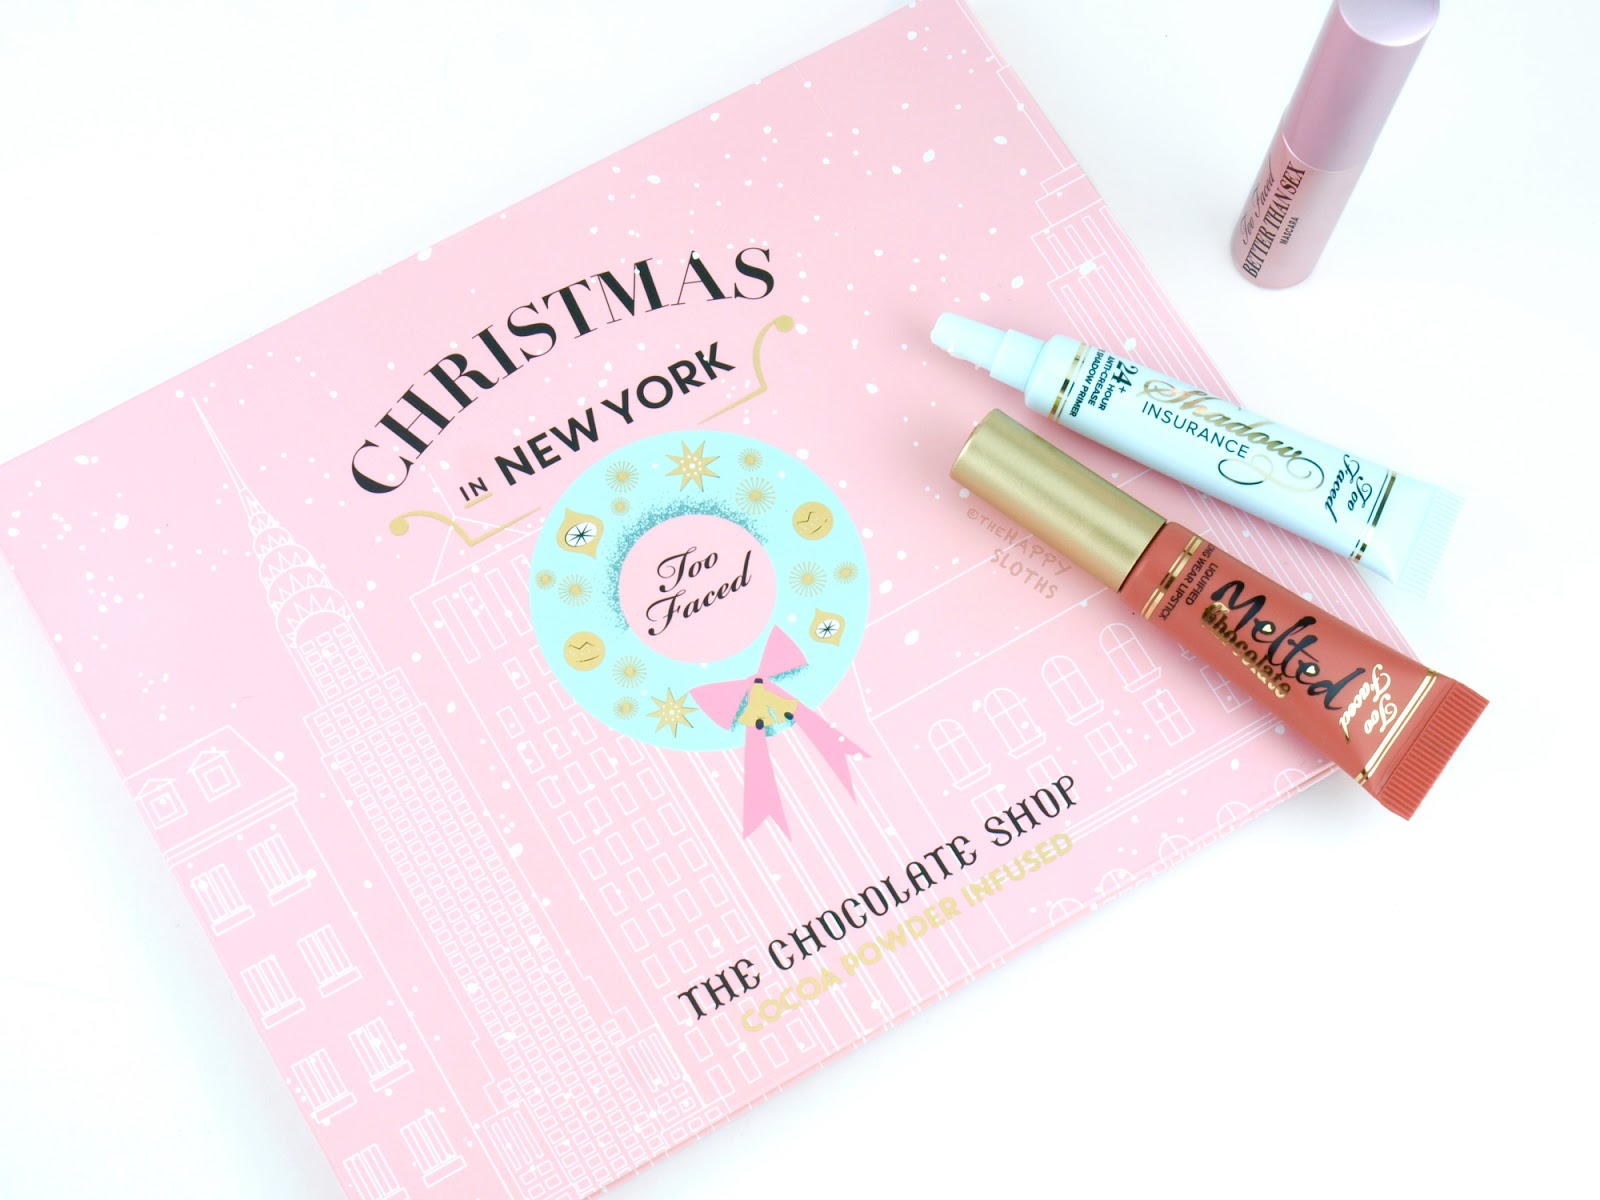 Too Faced Holiday 2016 The Chocolate Shop: Review and Swatches